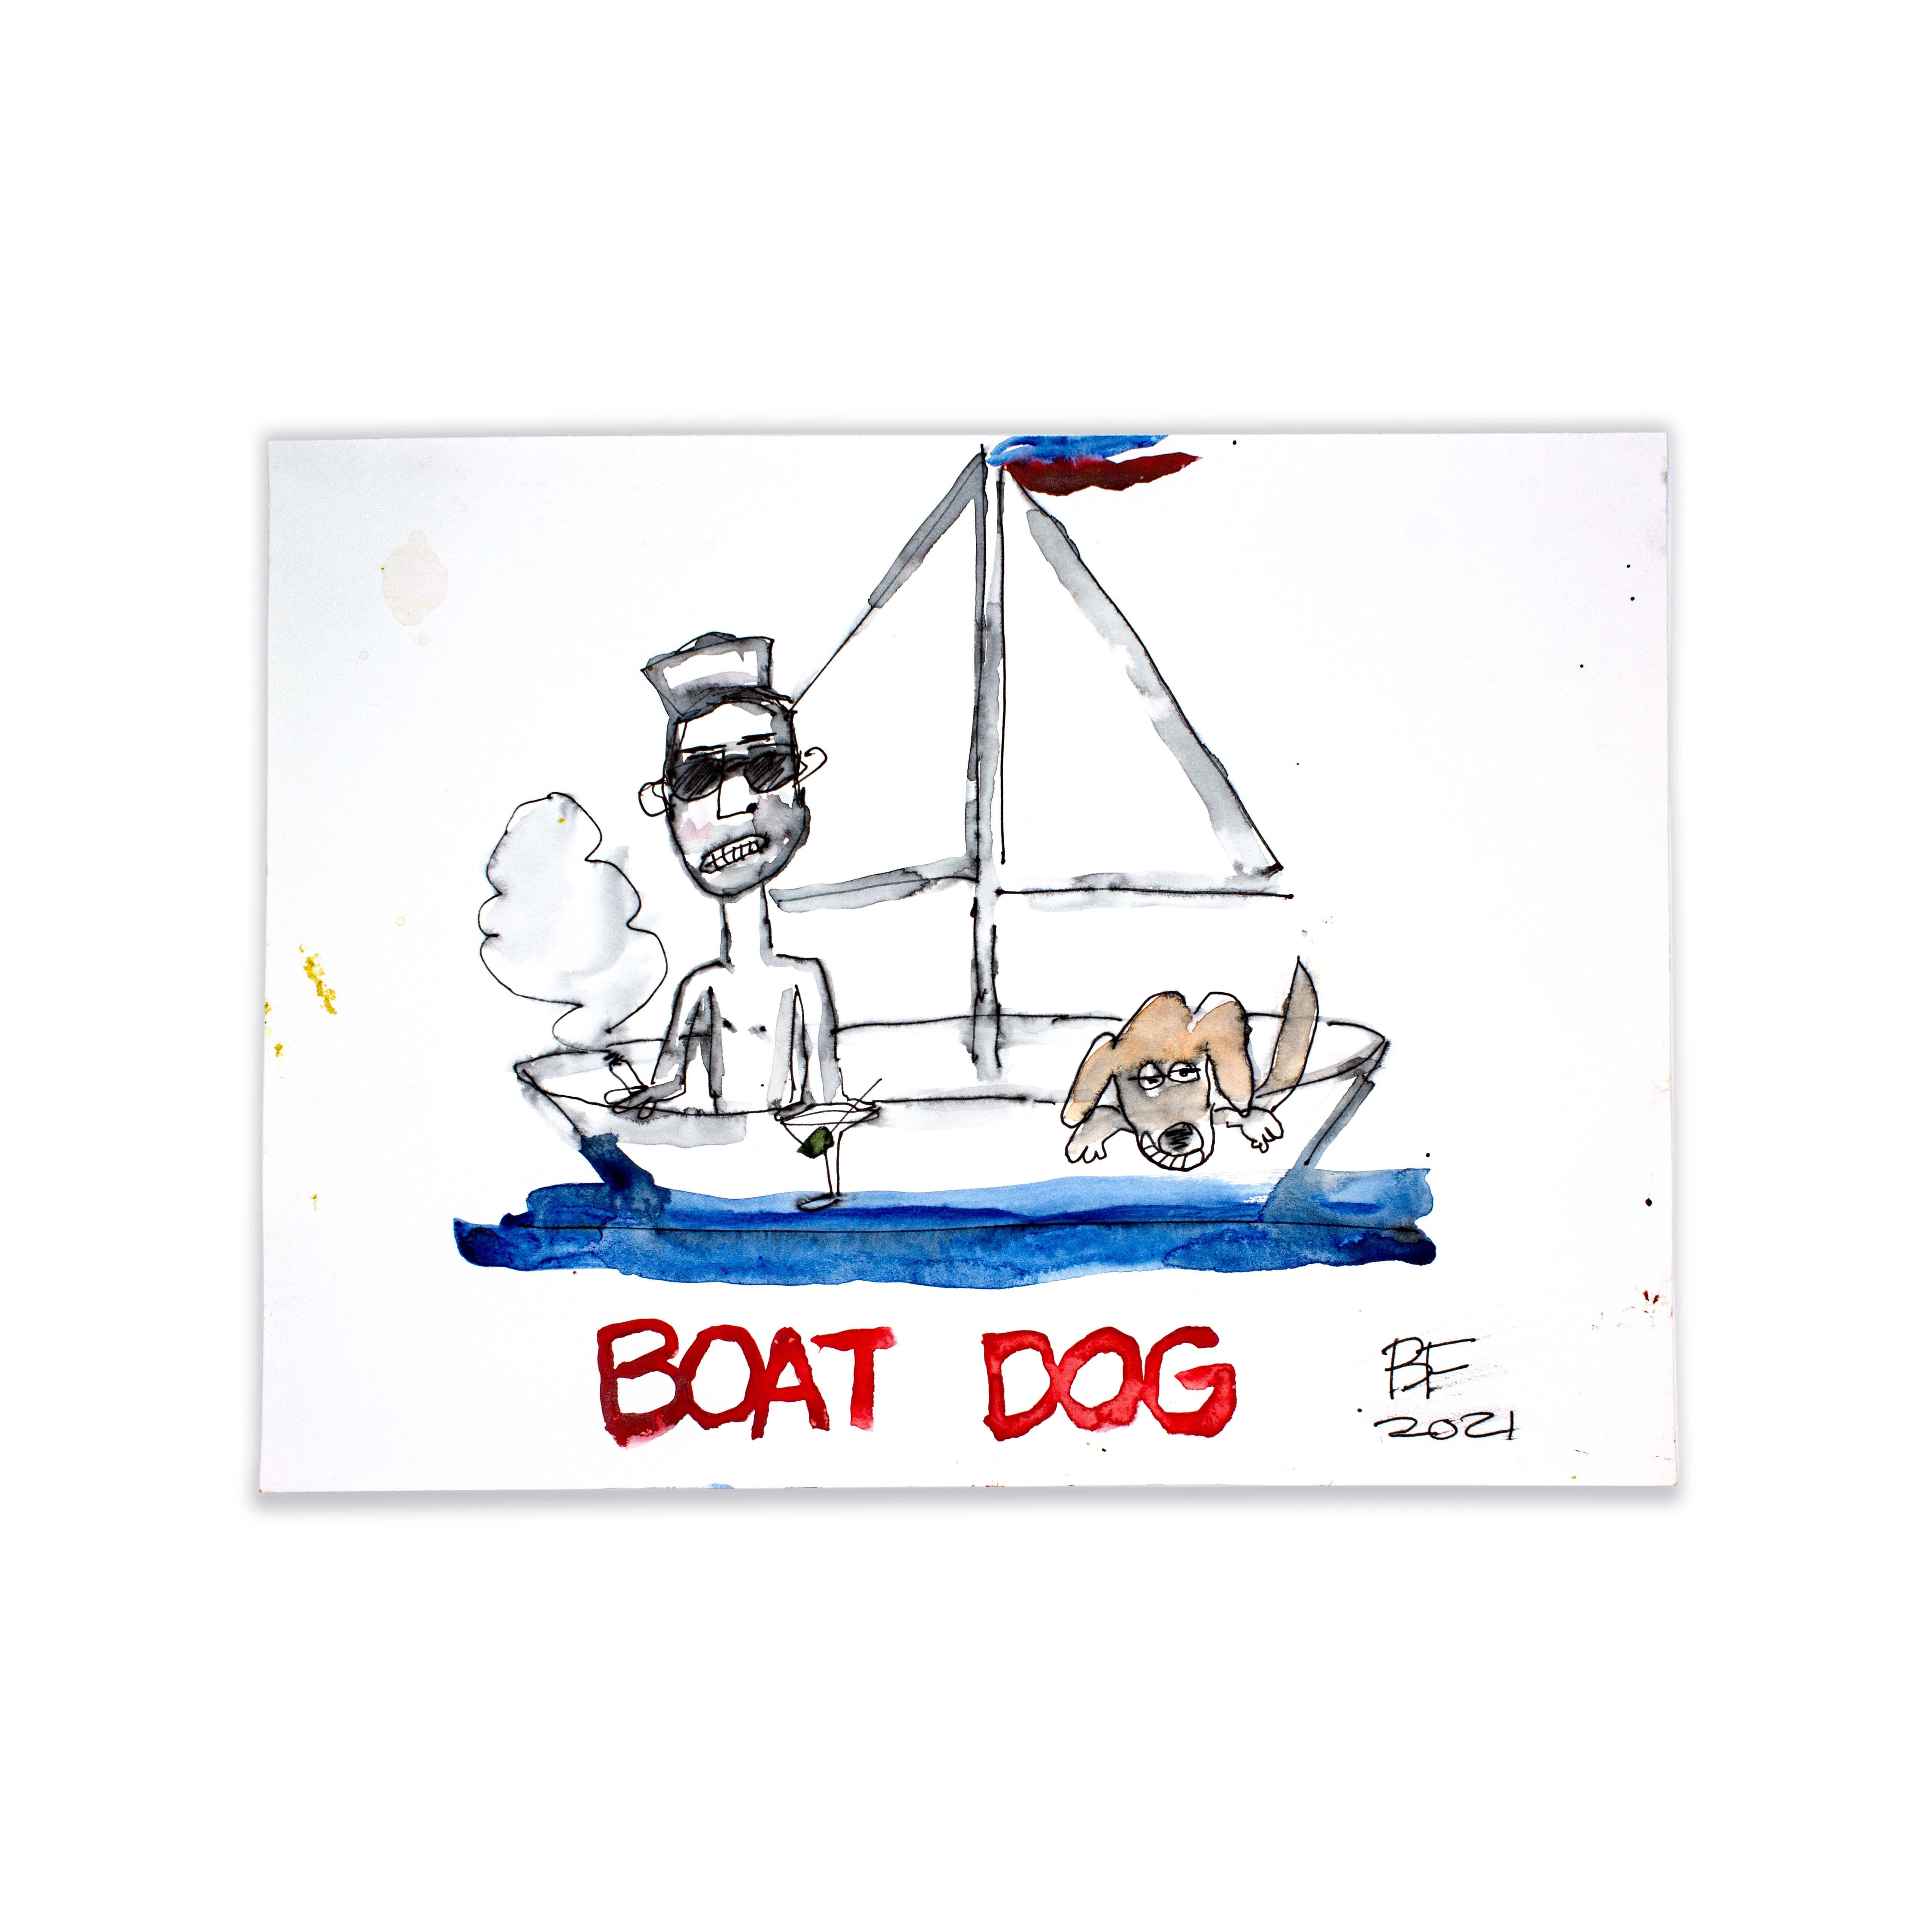 Boat Dog, 2021

Ink and Japanese Watercolor on paper by artist Brad Fisher. Unframed.

9 × 12 in

Shipping is not included. See our shipping policies. Please contact us for shipping quotes and customization options. 
 
All sales are final.